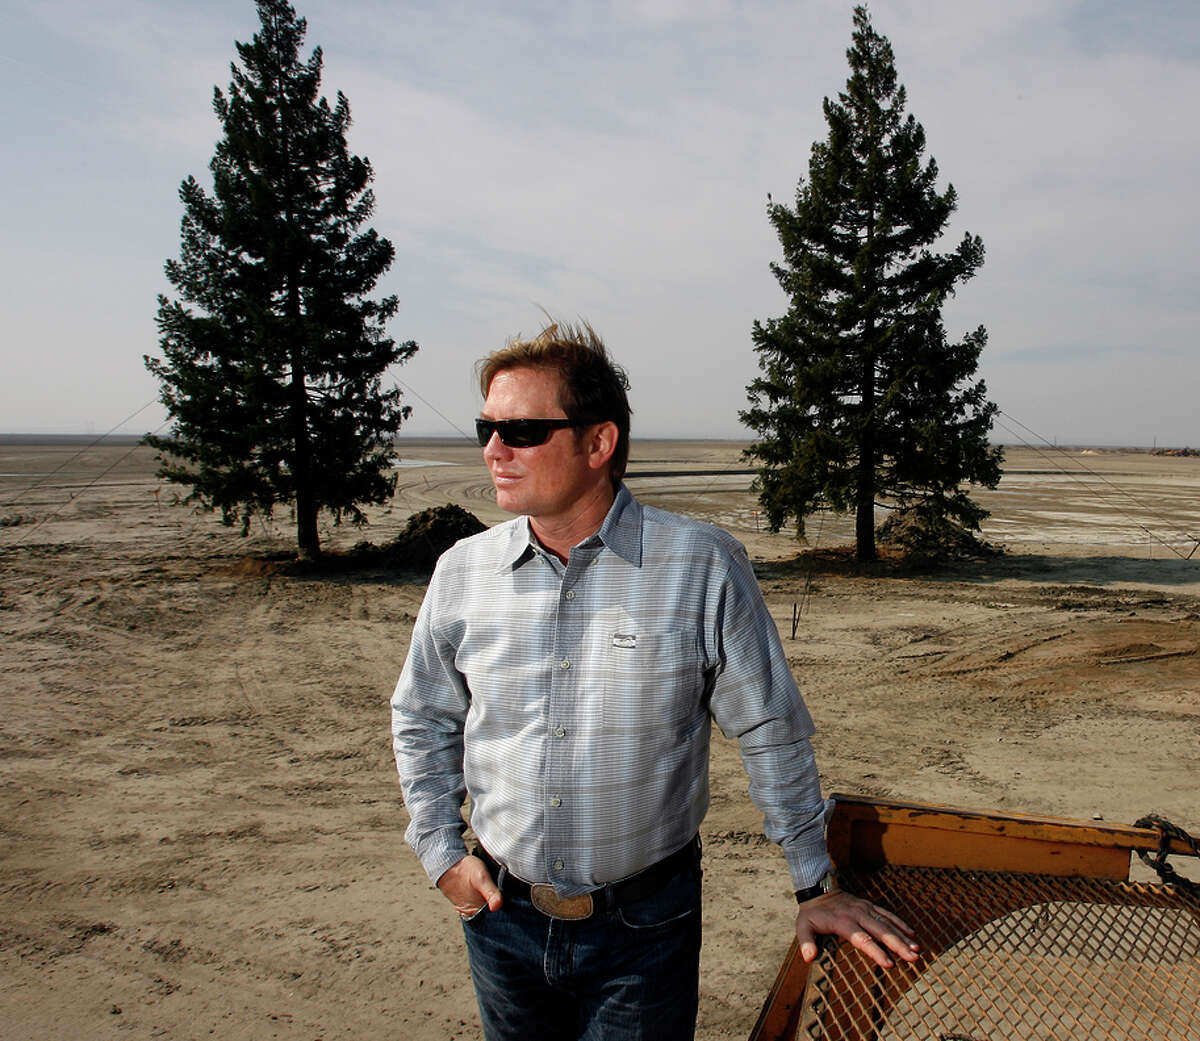 Developer Quay Hays has long planned to build a high-tech, solar-powered town on ranch land in the Central Valley.